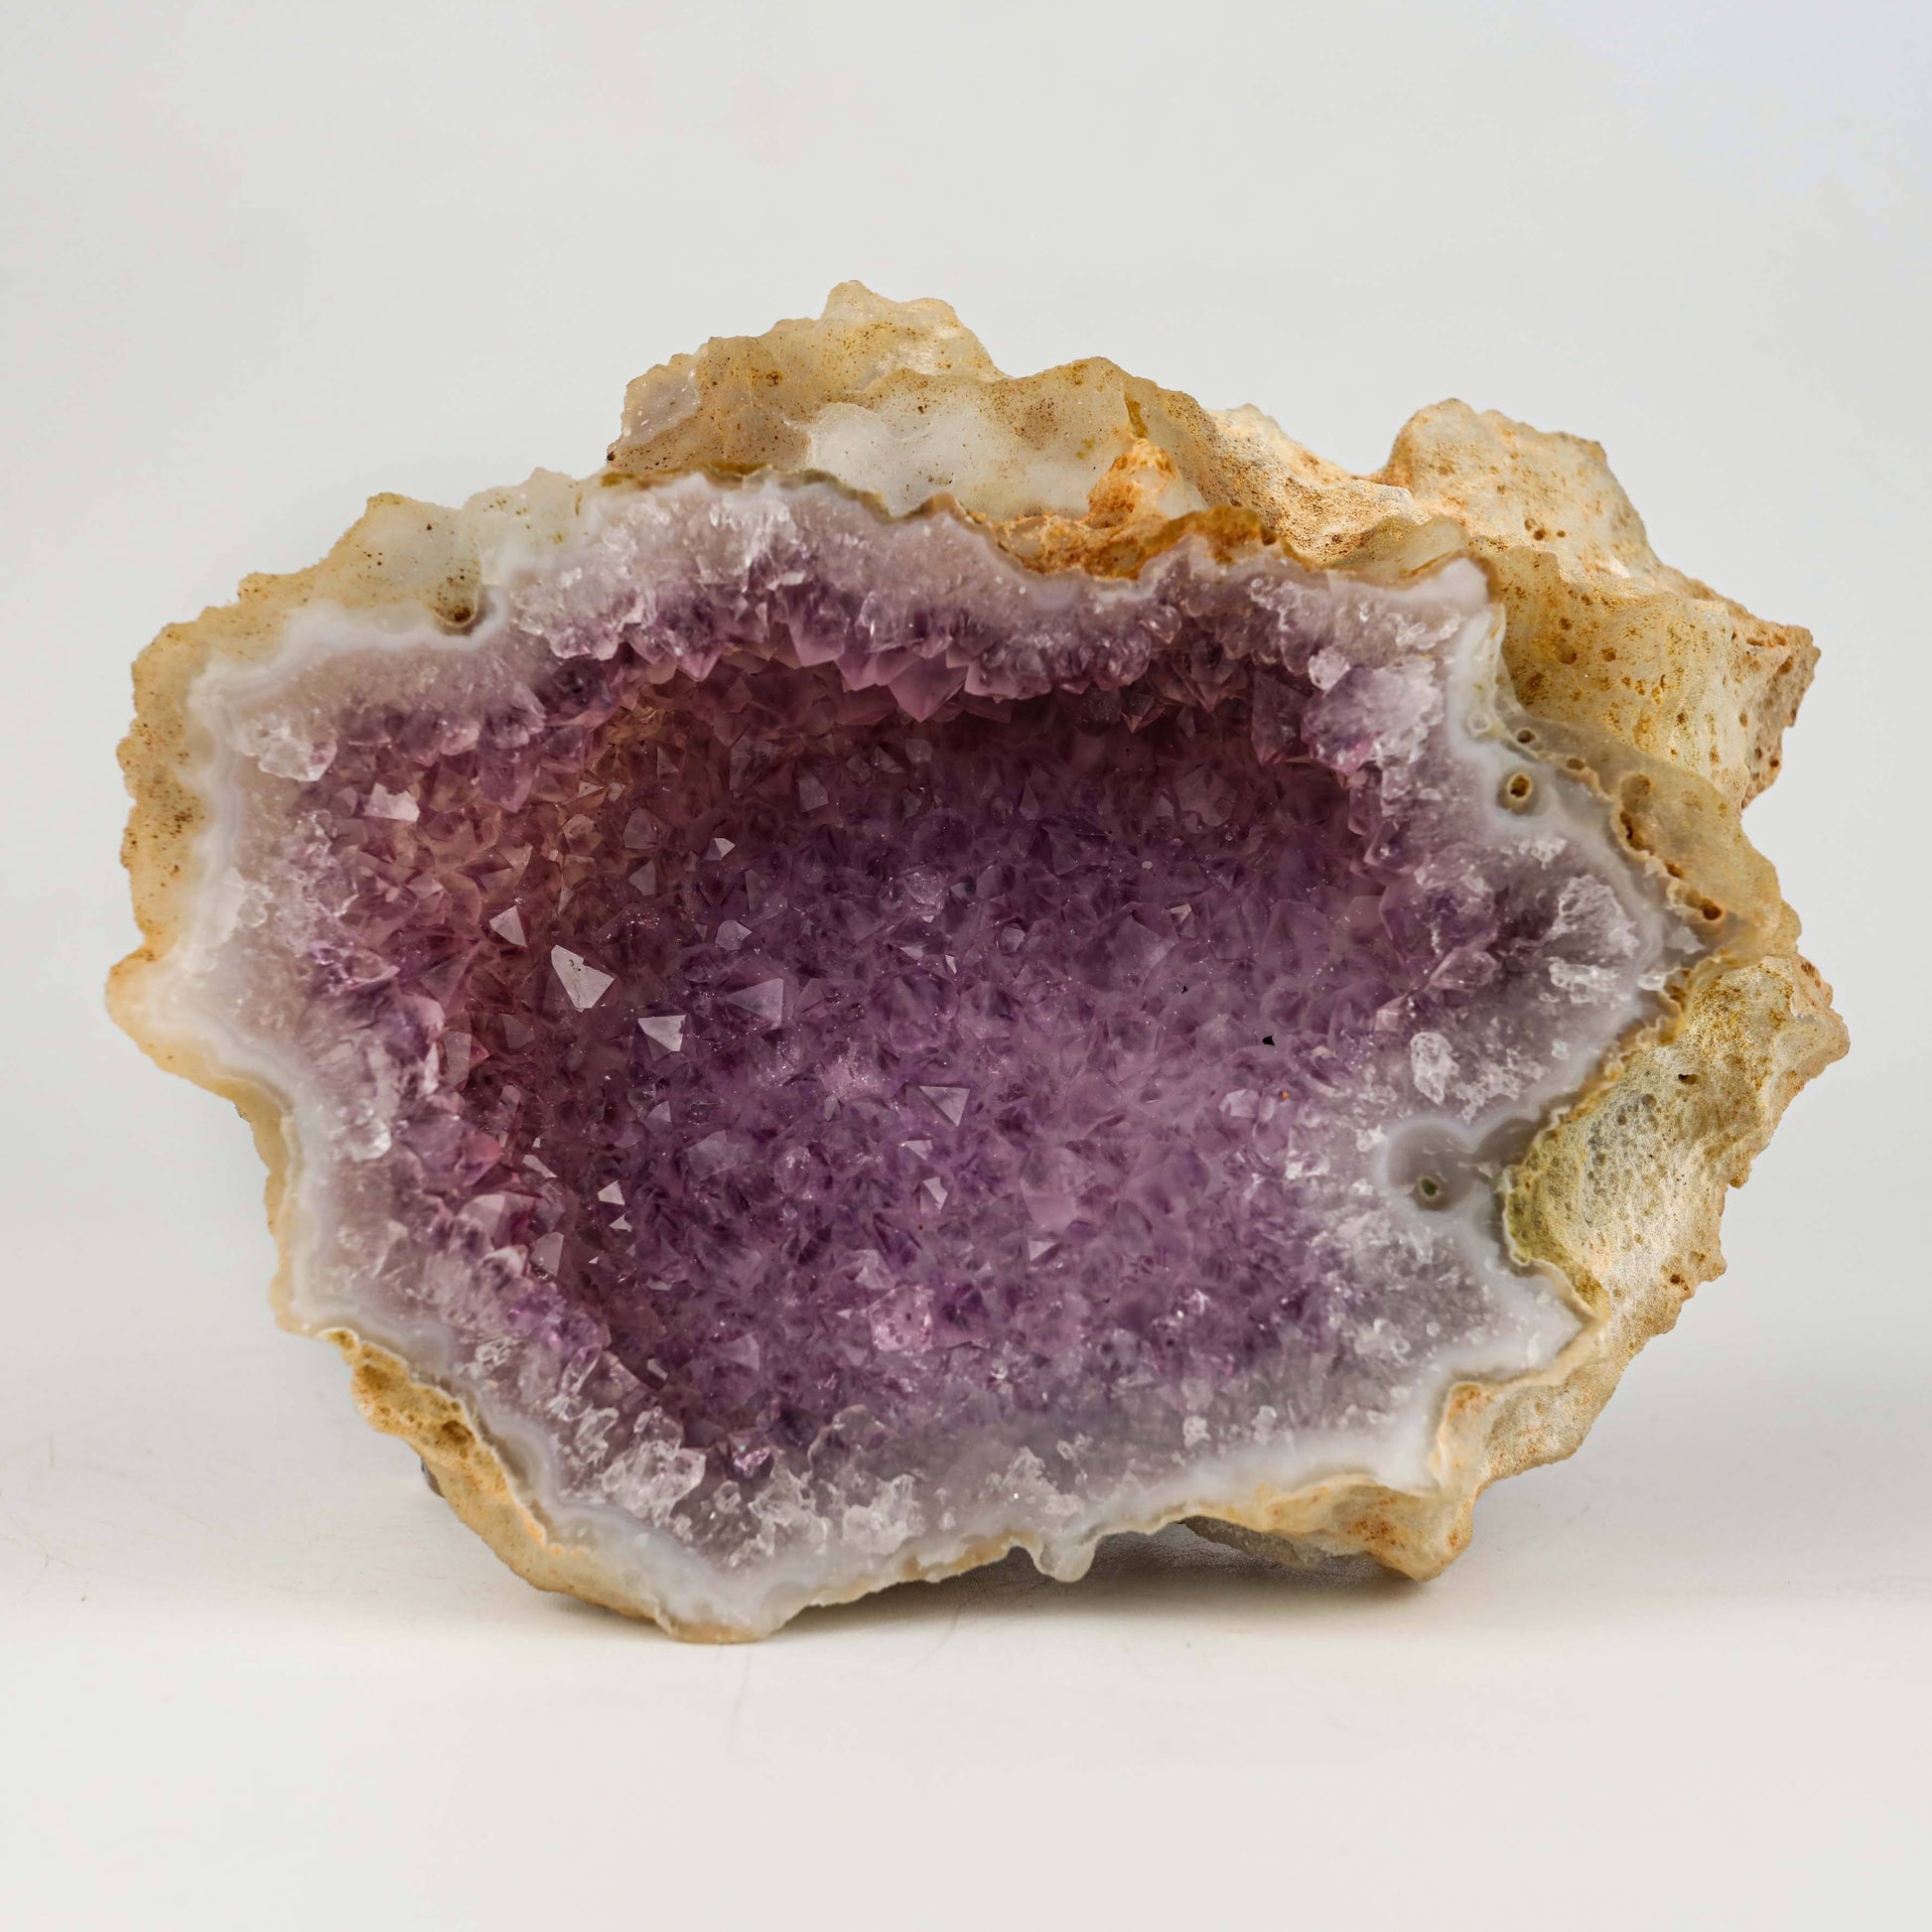 Amethyst Purple Crystals Geode (2 Halves ) Natural Mineral Specimen #…  https://www.superbminerals.us/products/amethyst-purple-crystals-geode-2-halves-natural-mineral-specimen-b-4941  Features: An extremely stylish piece highlighting two parts of an Amethyst Geode. The Amethyst crystals are on a Quartz which itself is on layers of clear, dark/blue Chalcedony. The tone, shine and differentiation is astonishing. Furthermore, to see two coordinated parts showed is an eye-catcher. At the point when